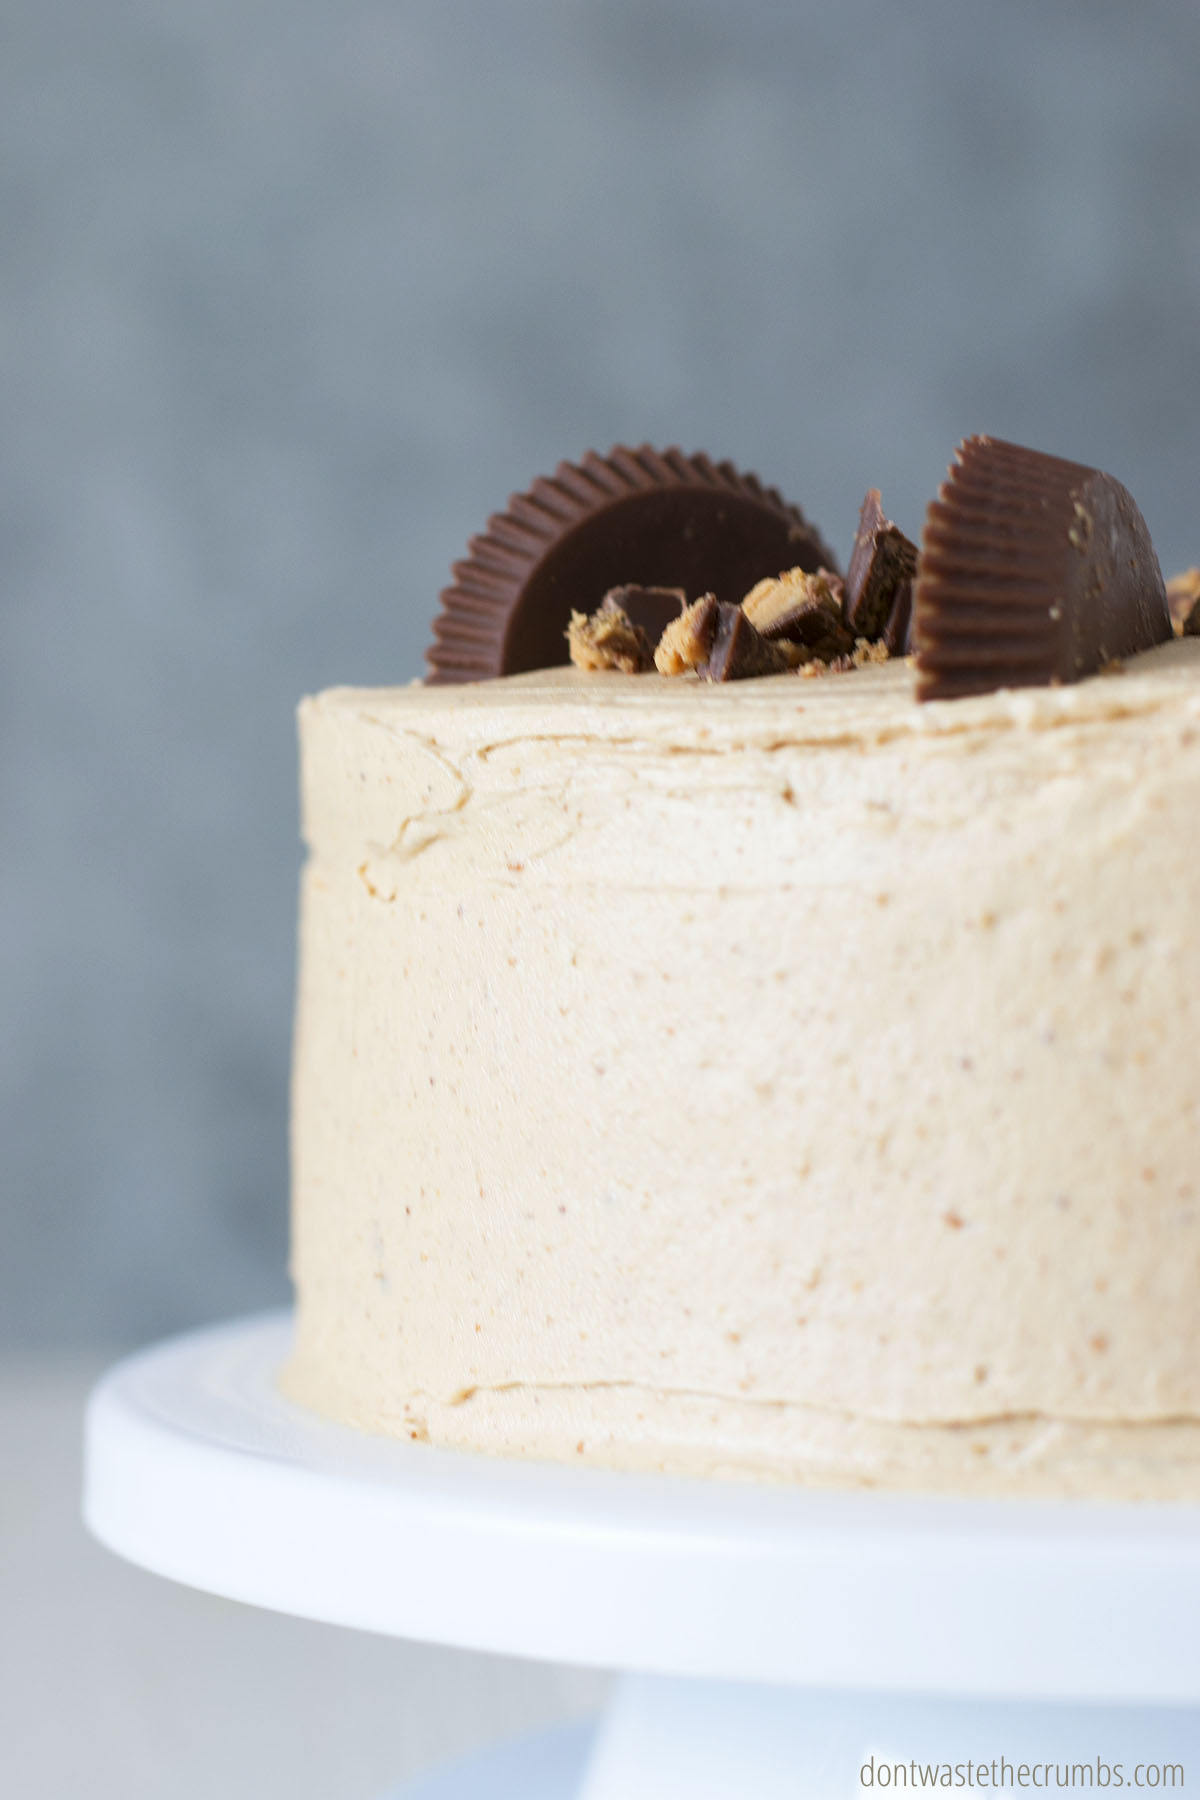 Cake frosted with creamy peanut butter frosting.